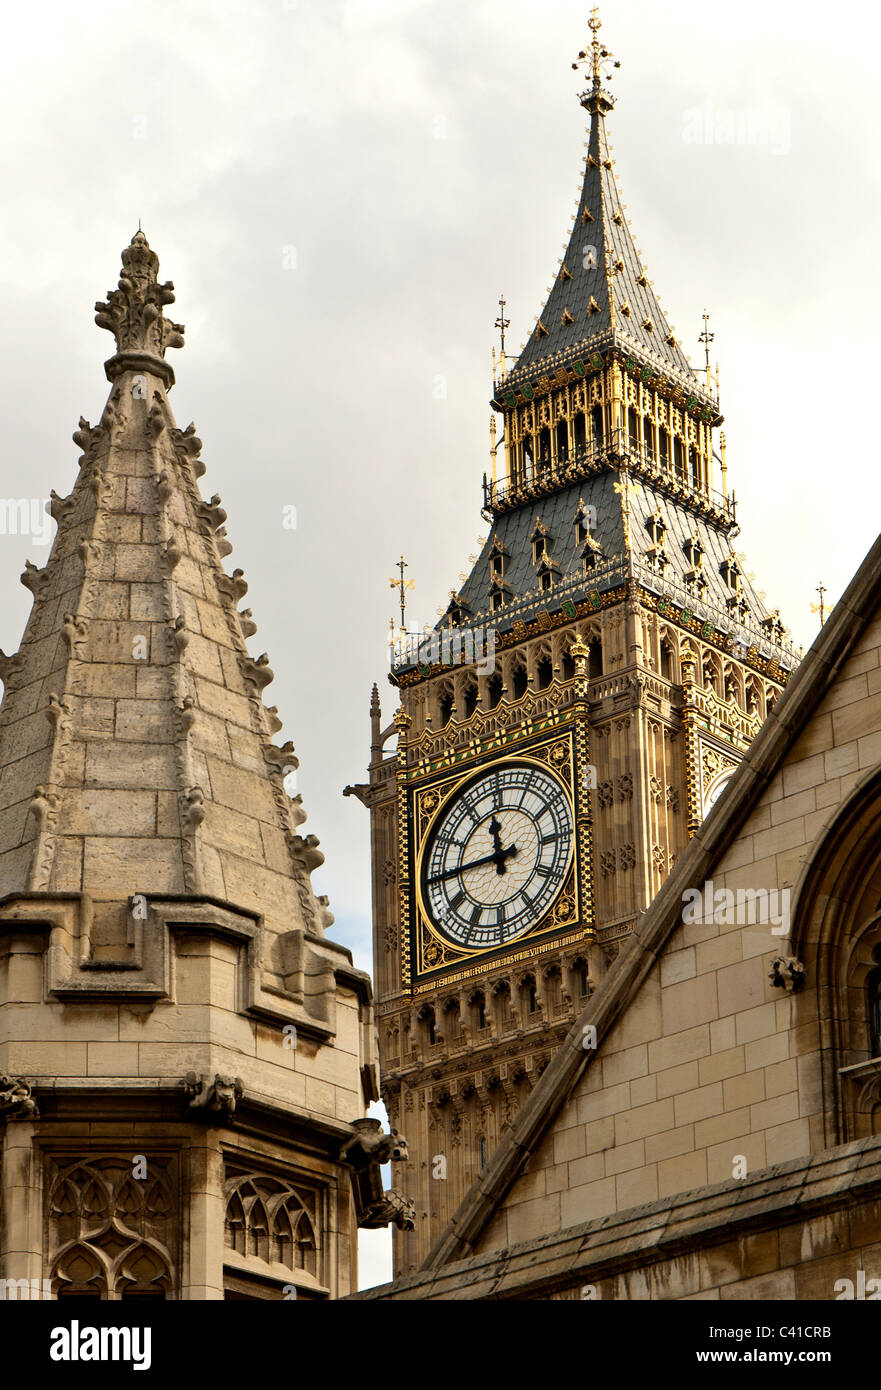 Westminster Parlament; Parlament in Westminster, London Stockfoto